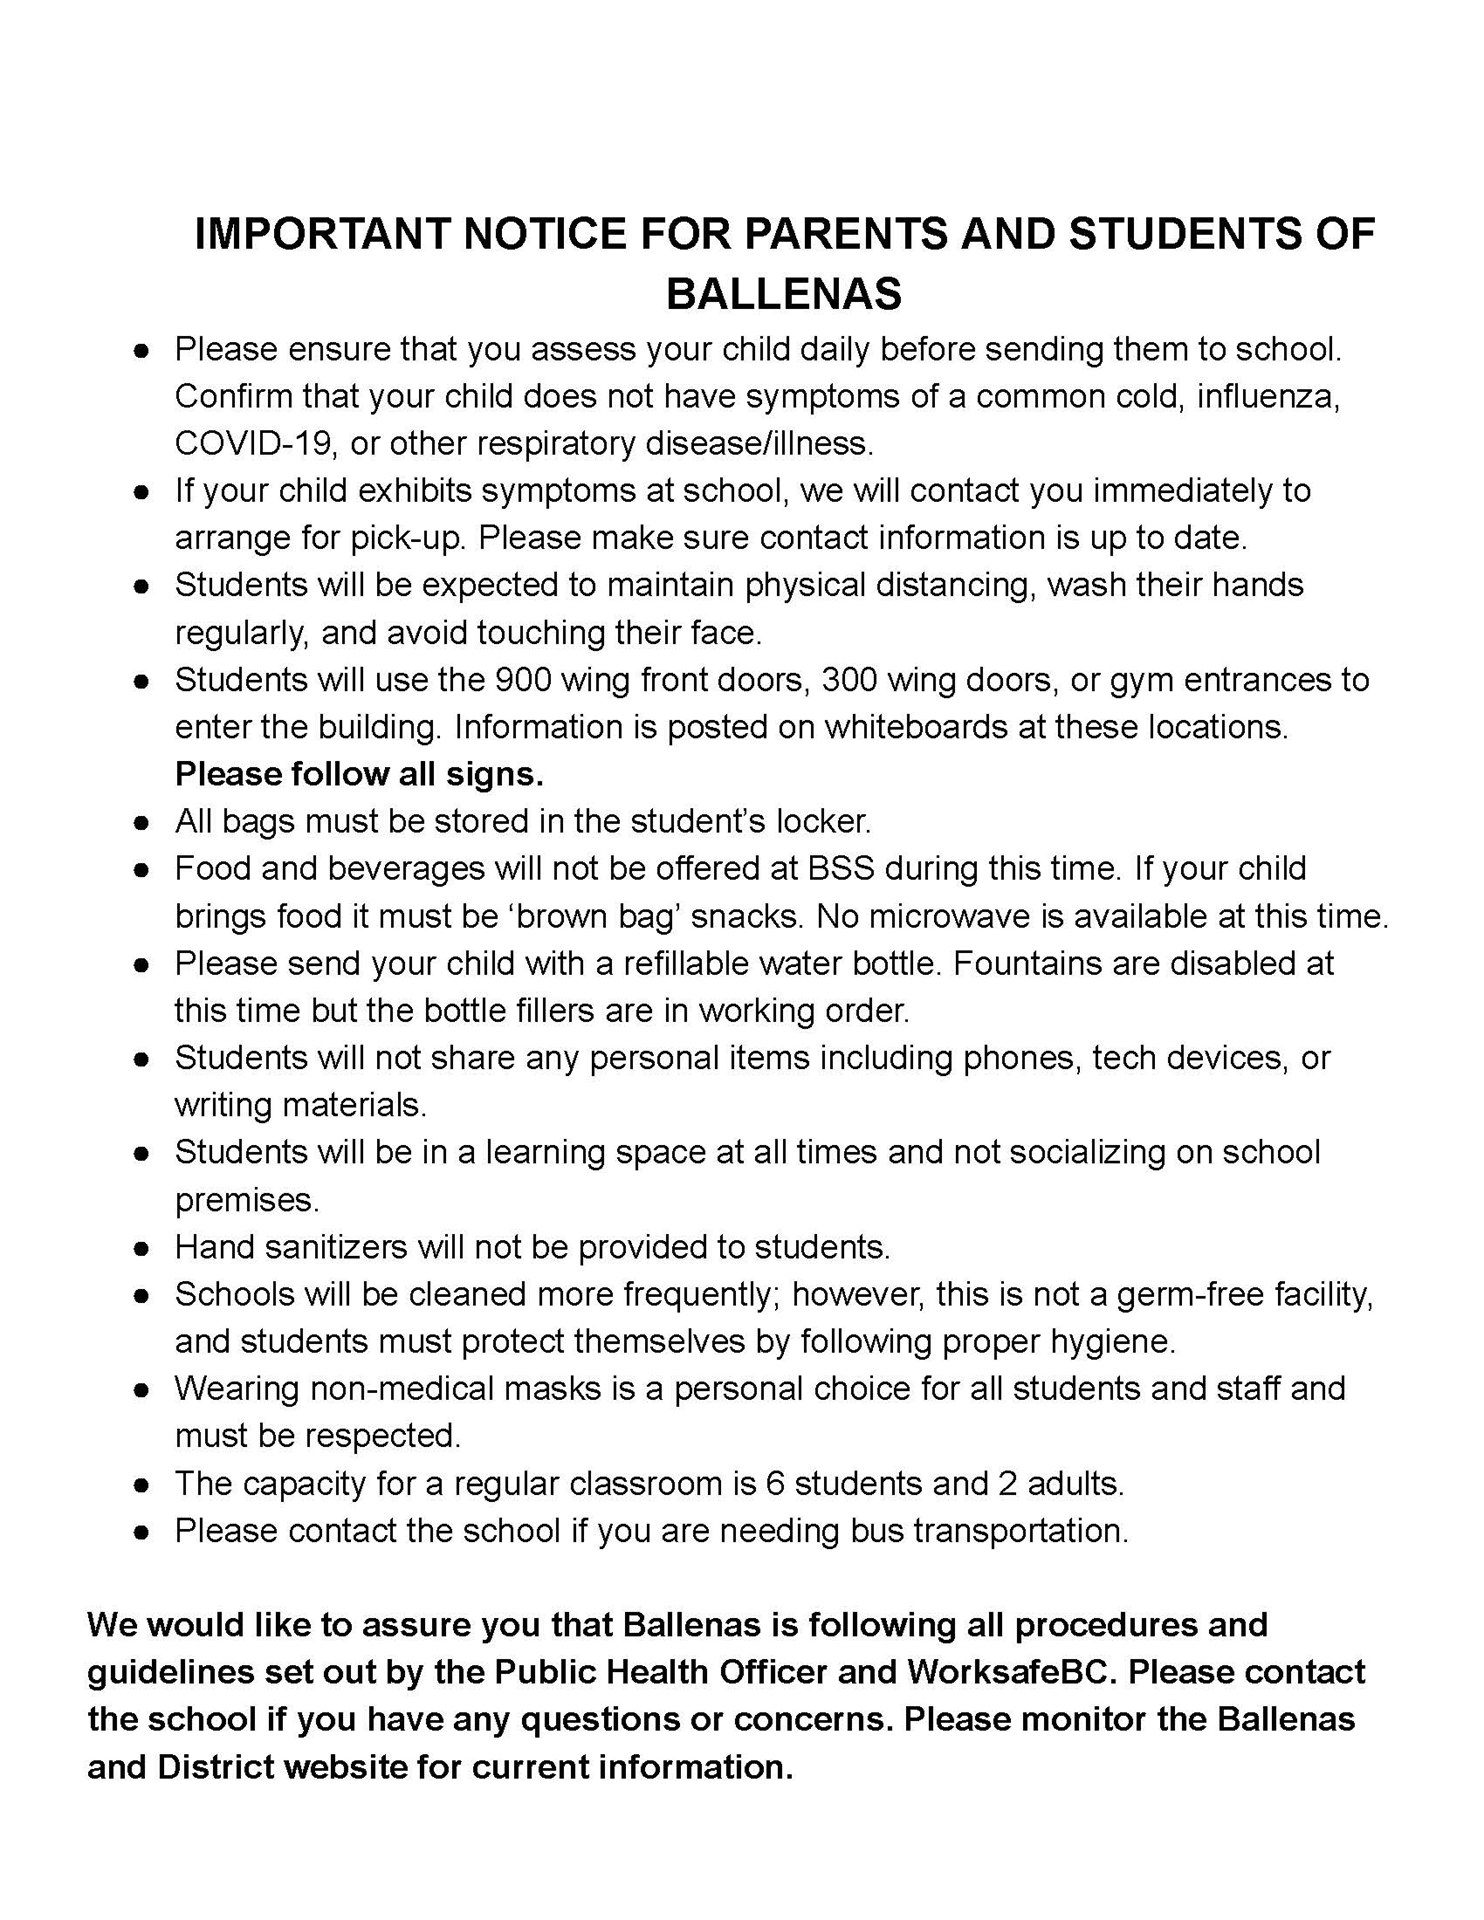 IMPORTANT NOTICE FOR PARENTS AND STUDENTS OF BALLENAS.jpg